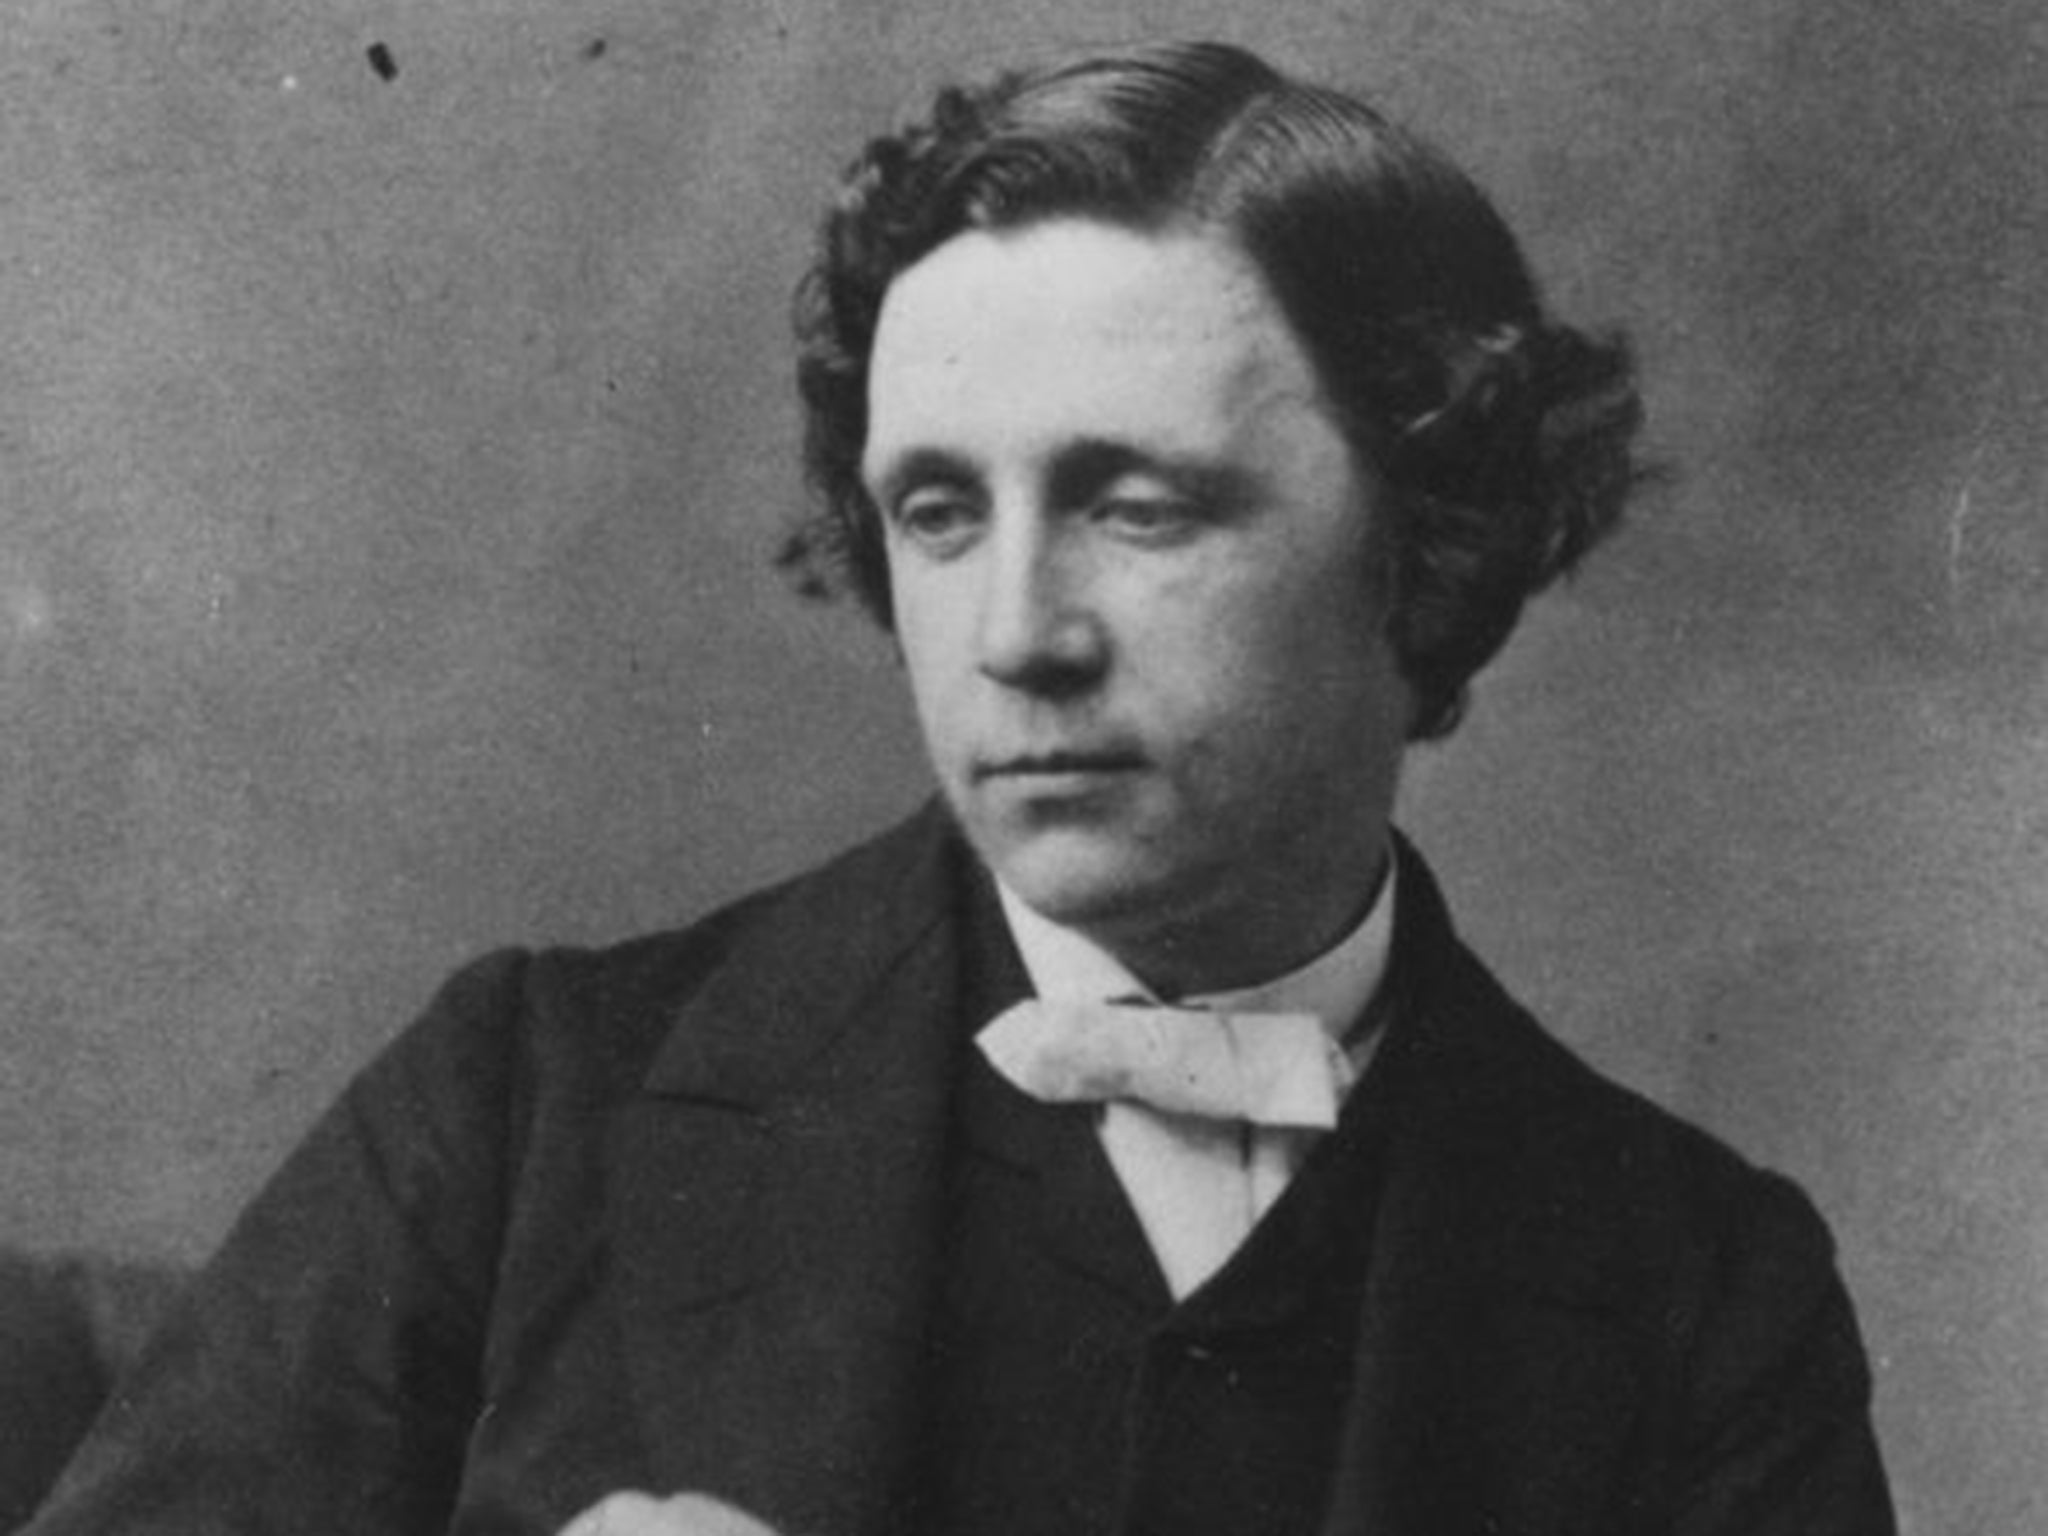 Charles Dodgson, better known as Lewis Carroll: a possible new poem has been discovered by the Alice in Wonderland author, though its provenance is still under debate